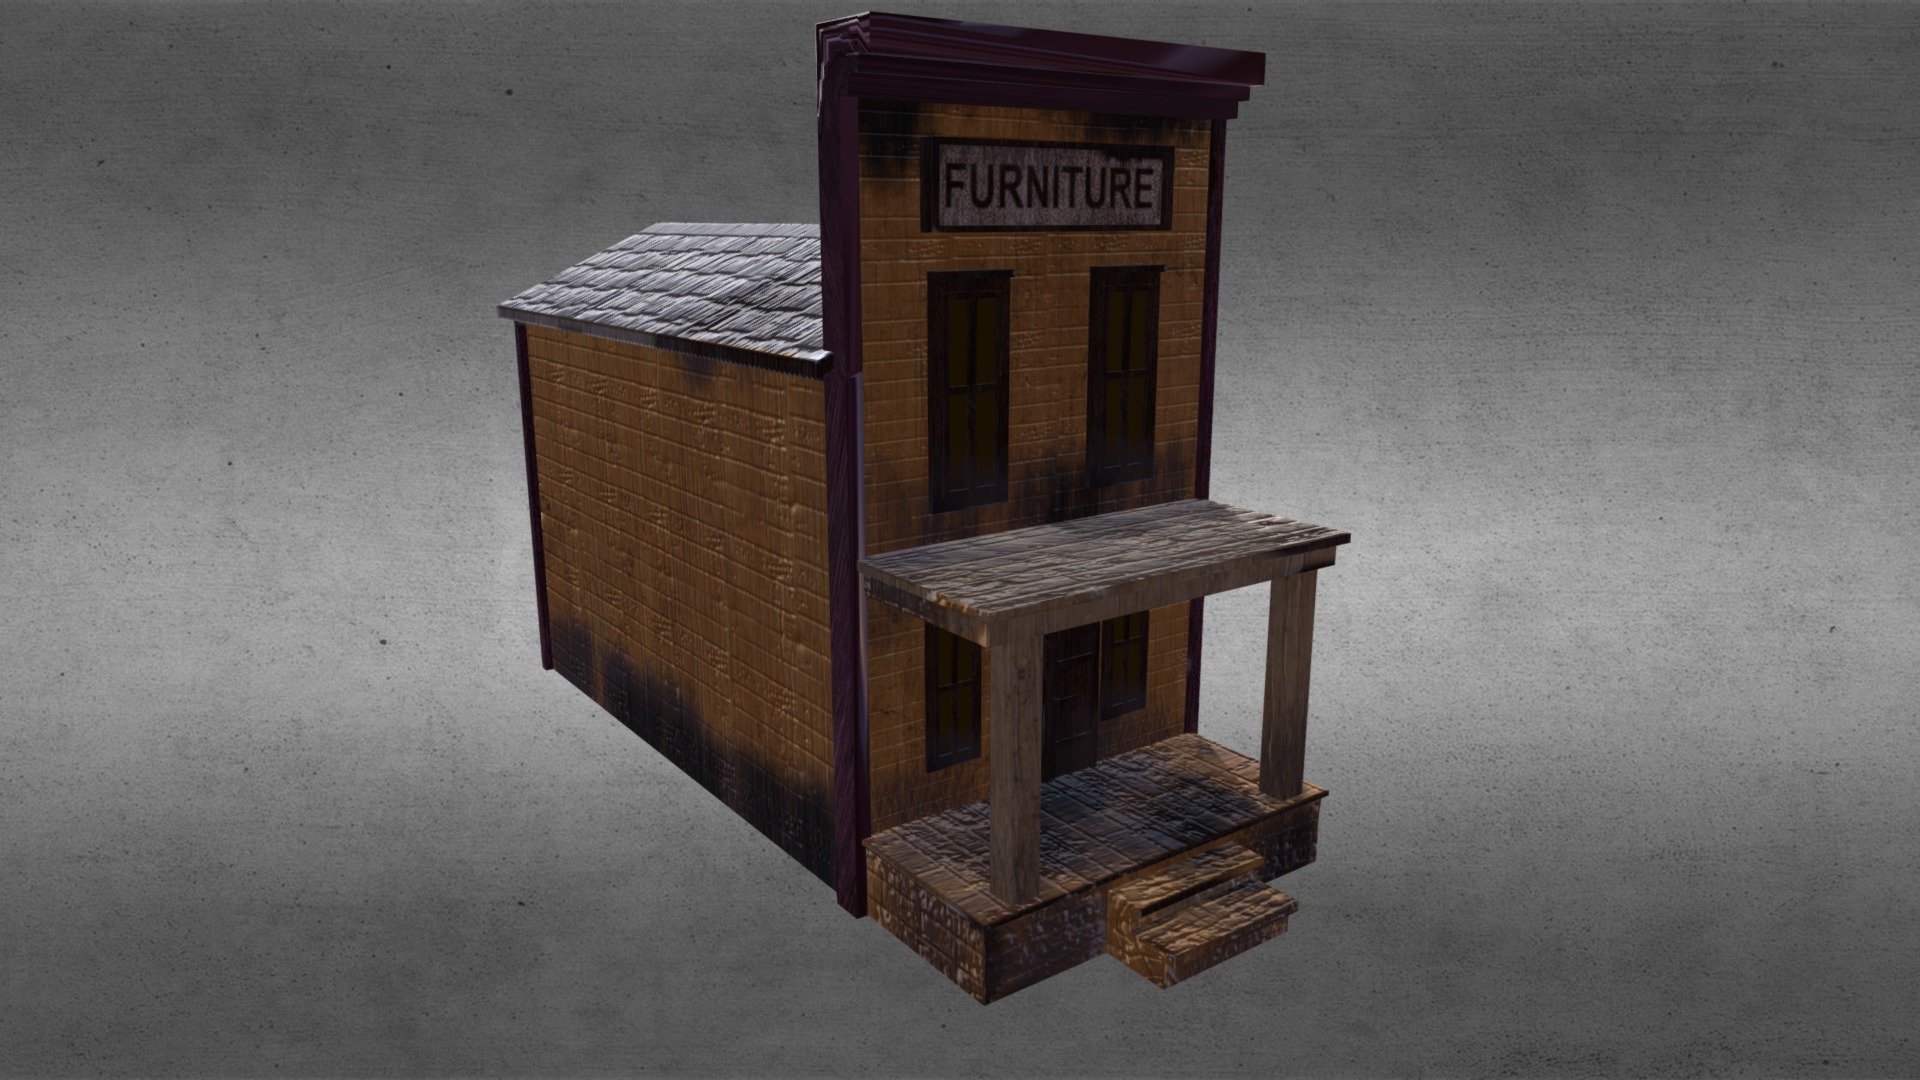 3D model Furniture House from the Wild West - This is a 3D model of the Furniture House from the Wild West. The 3D model is about a small wooden building.